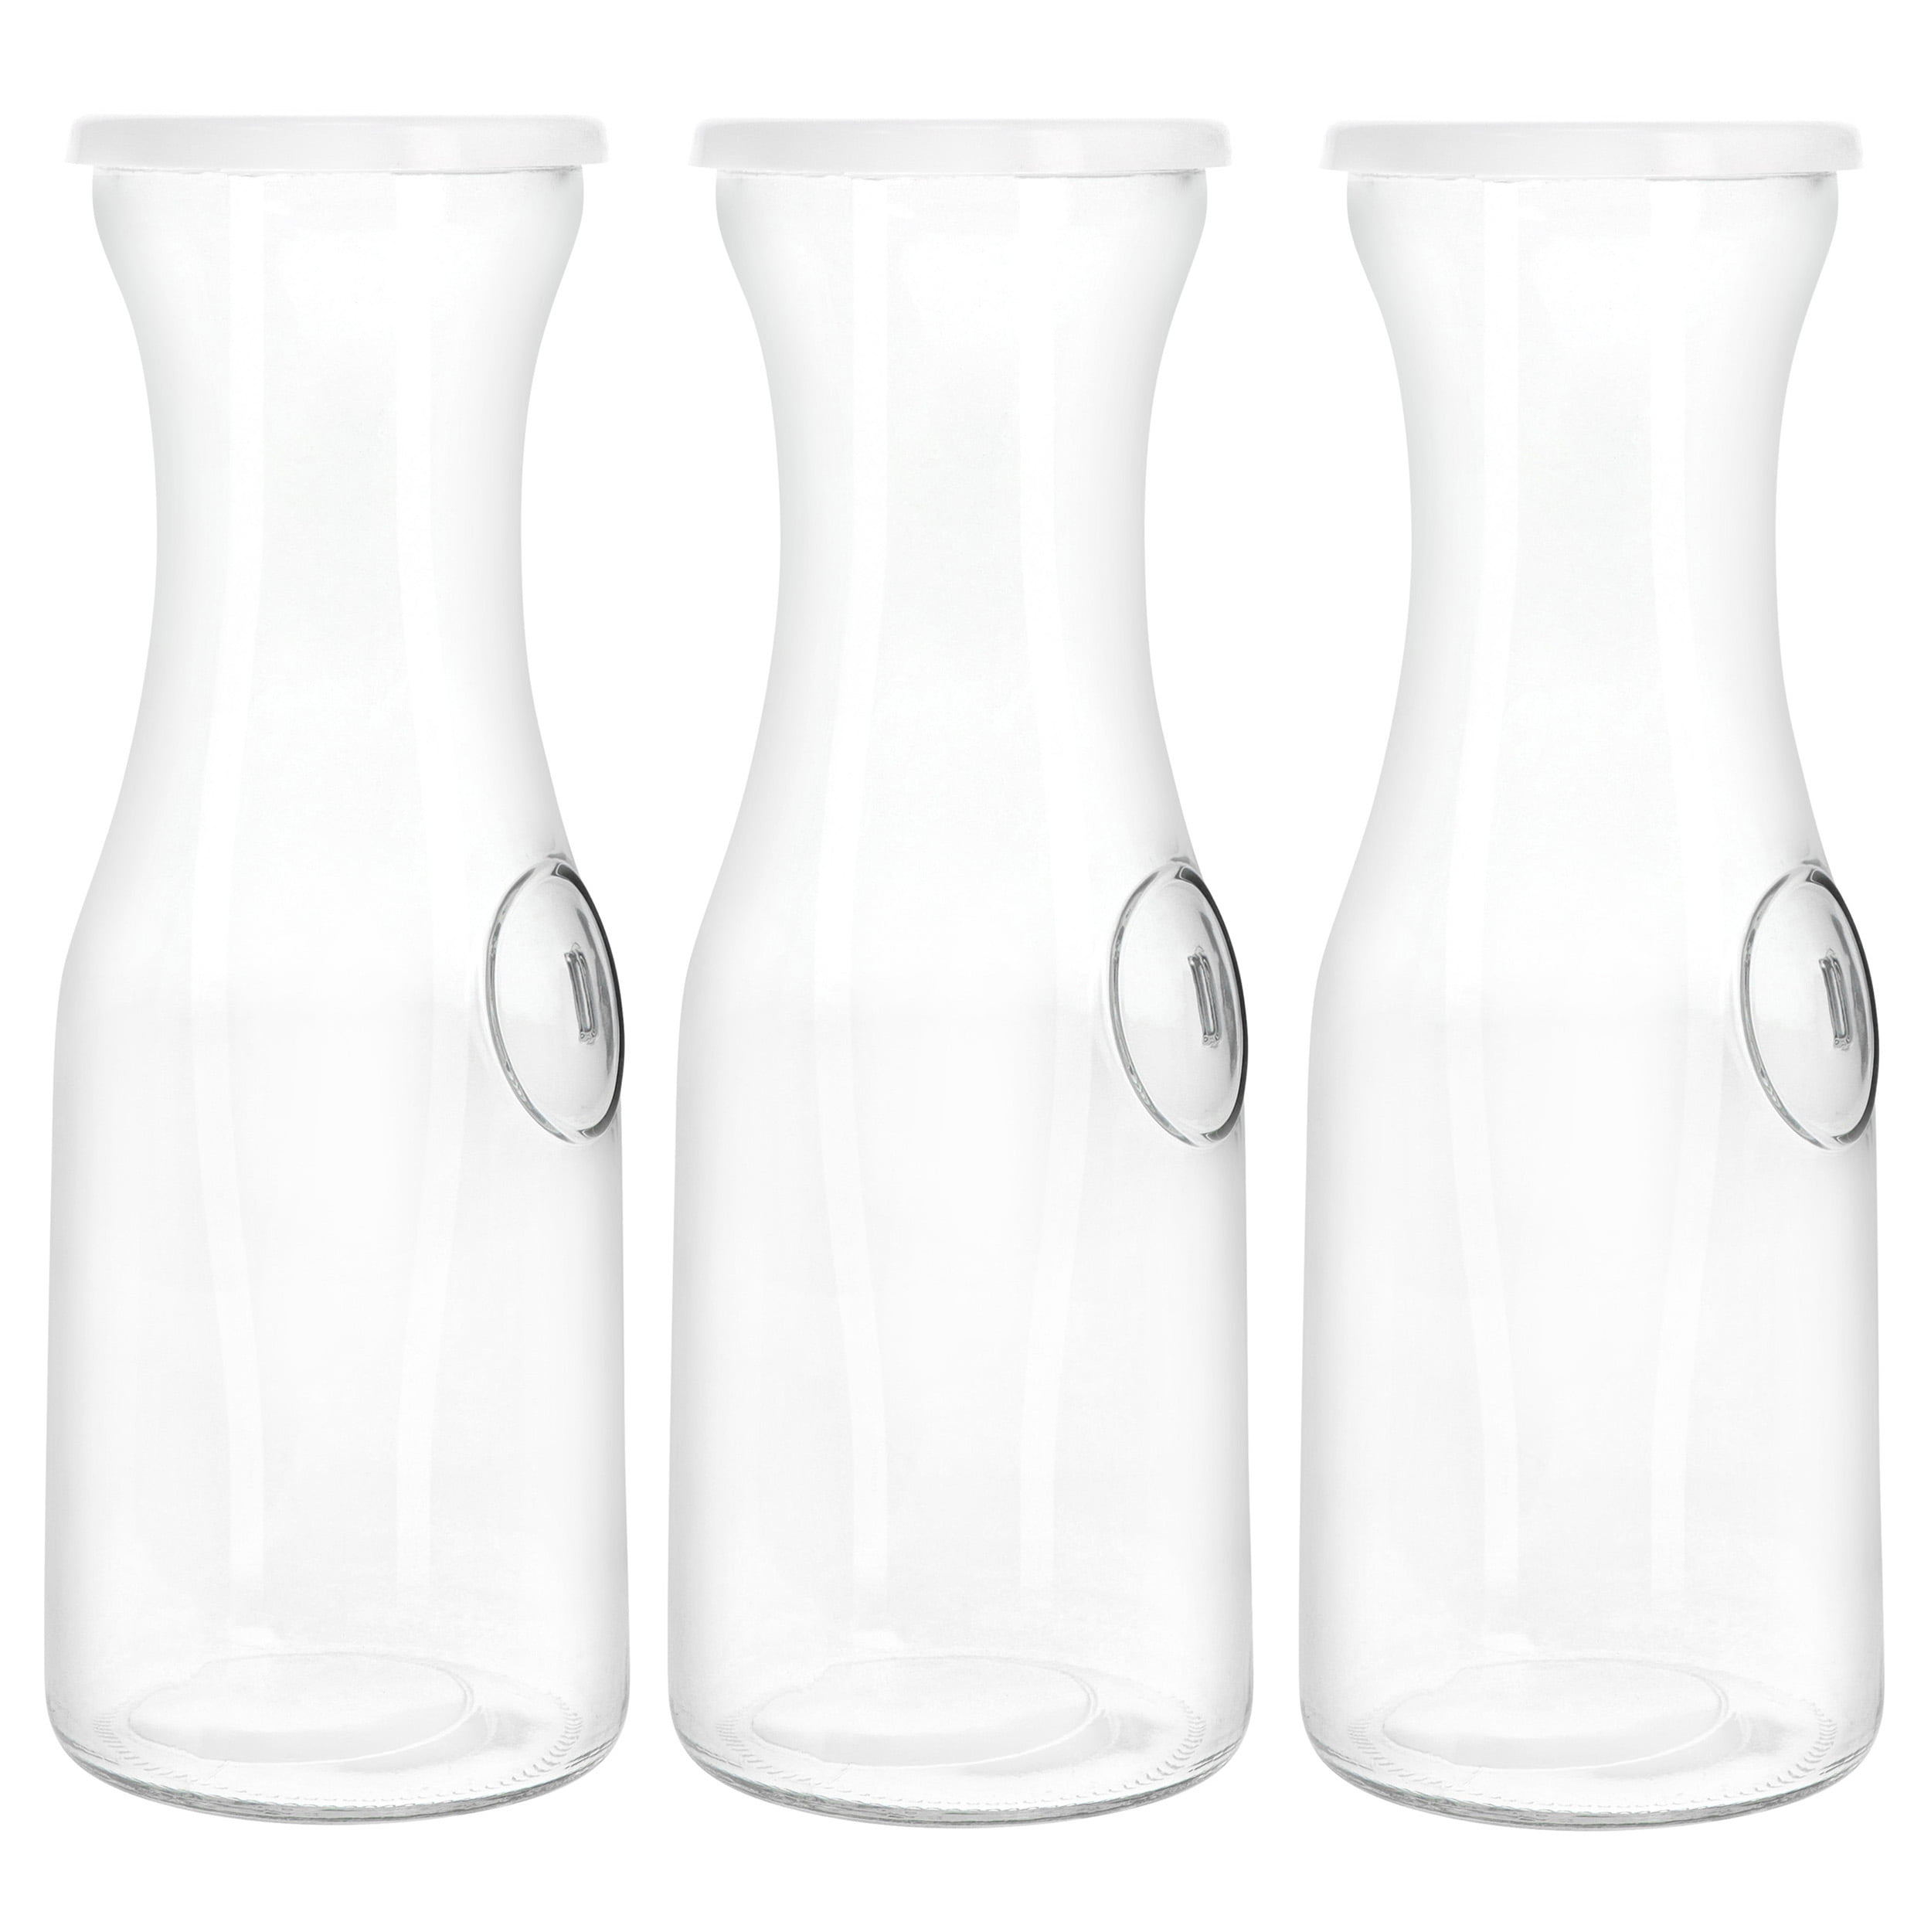 AYL Set of 4 Glass Carafe with Lids, 1 Liter Water Pitcher Beverage  Serveware Carafe, Clear Glass Pitcher for Mimosa Bar, Cold Water, Brunch,  Wine